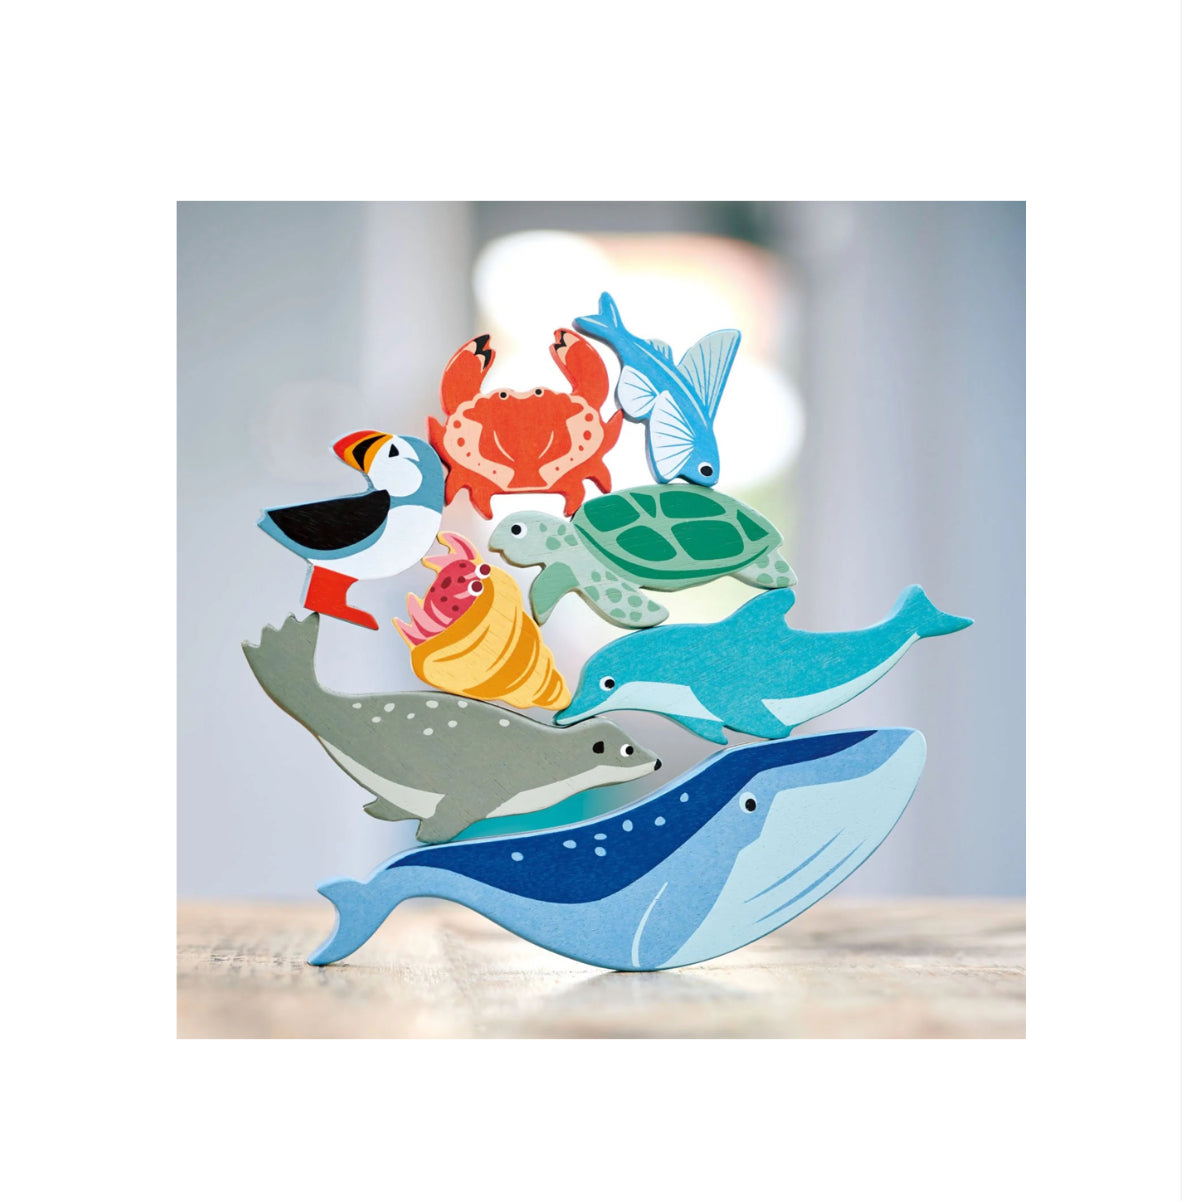 Tender Leaf Toys Whale Wooden Toy